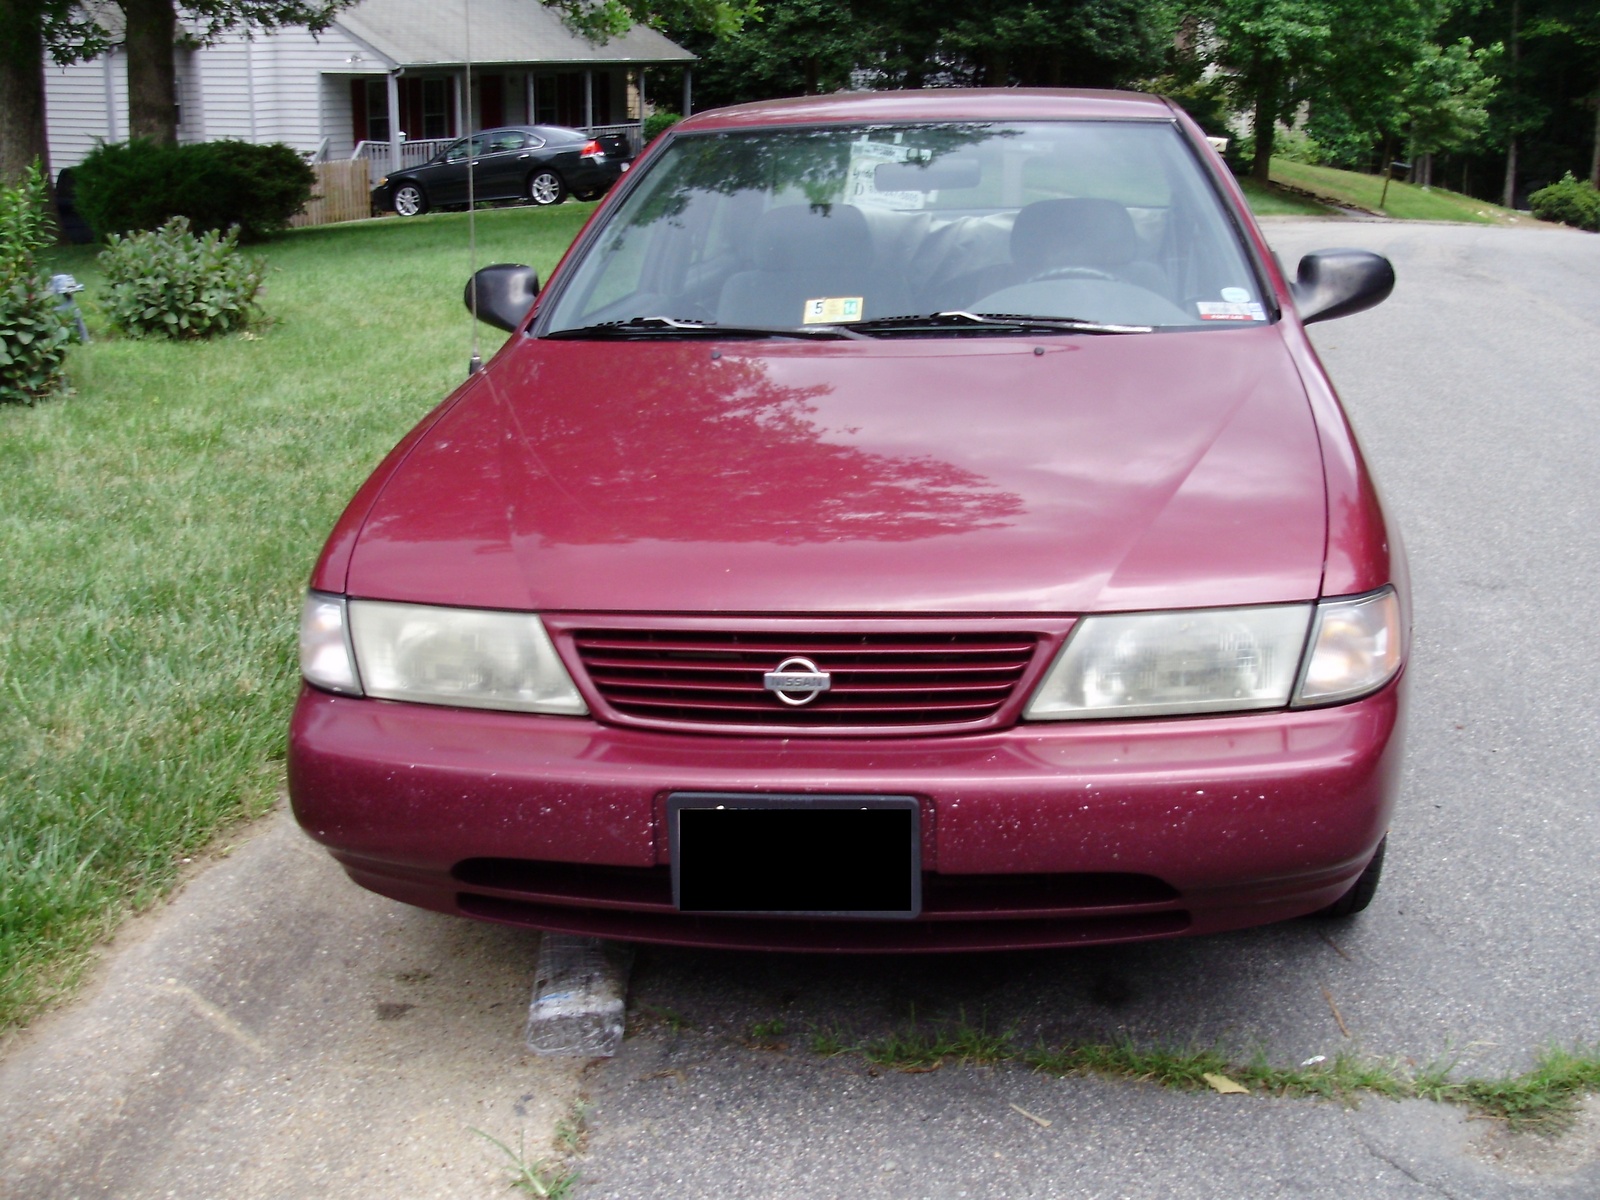 1997 Nissan sentra gxe consumer review #9